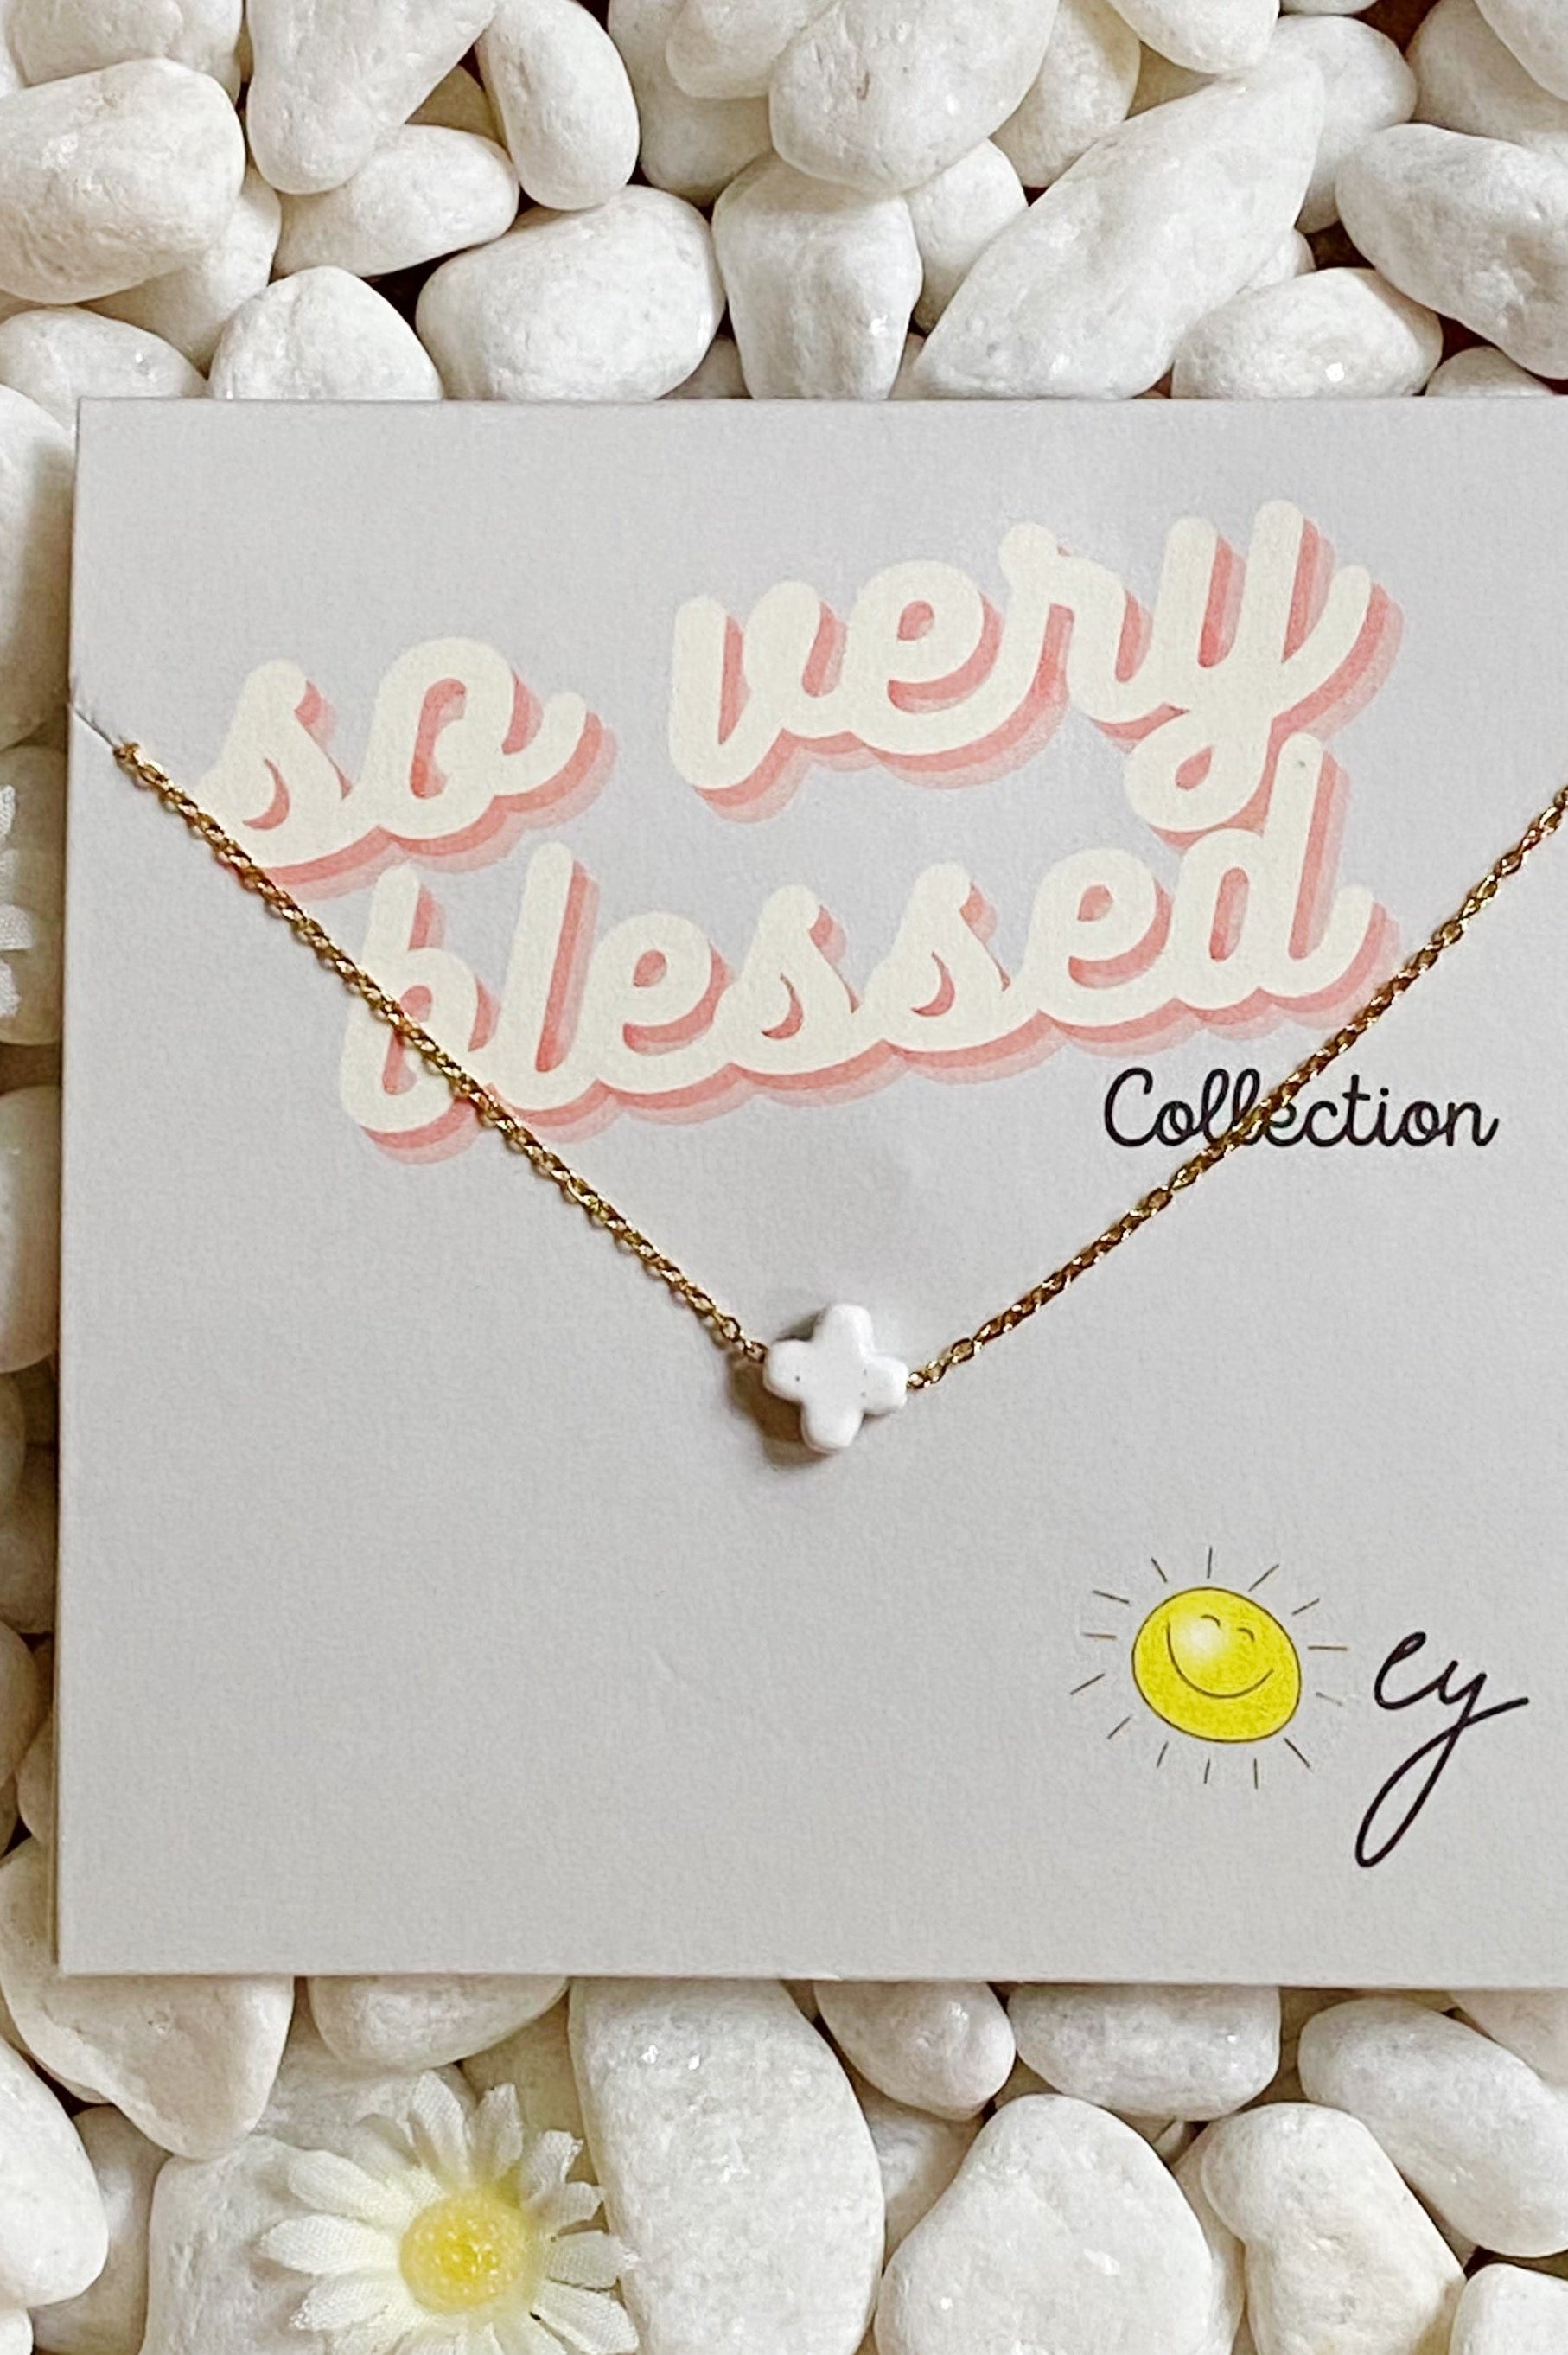 So Very Blessed Cross Necklace Ellisonyoung.com